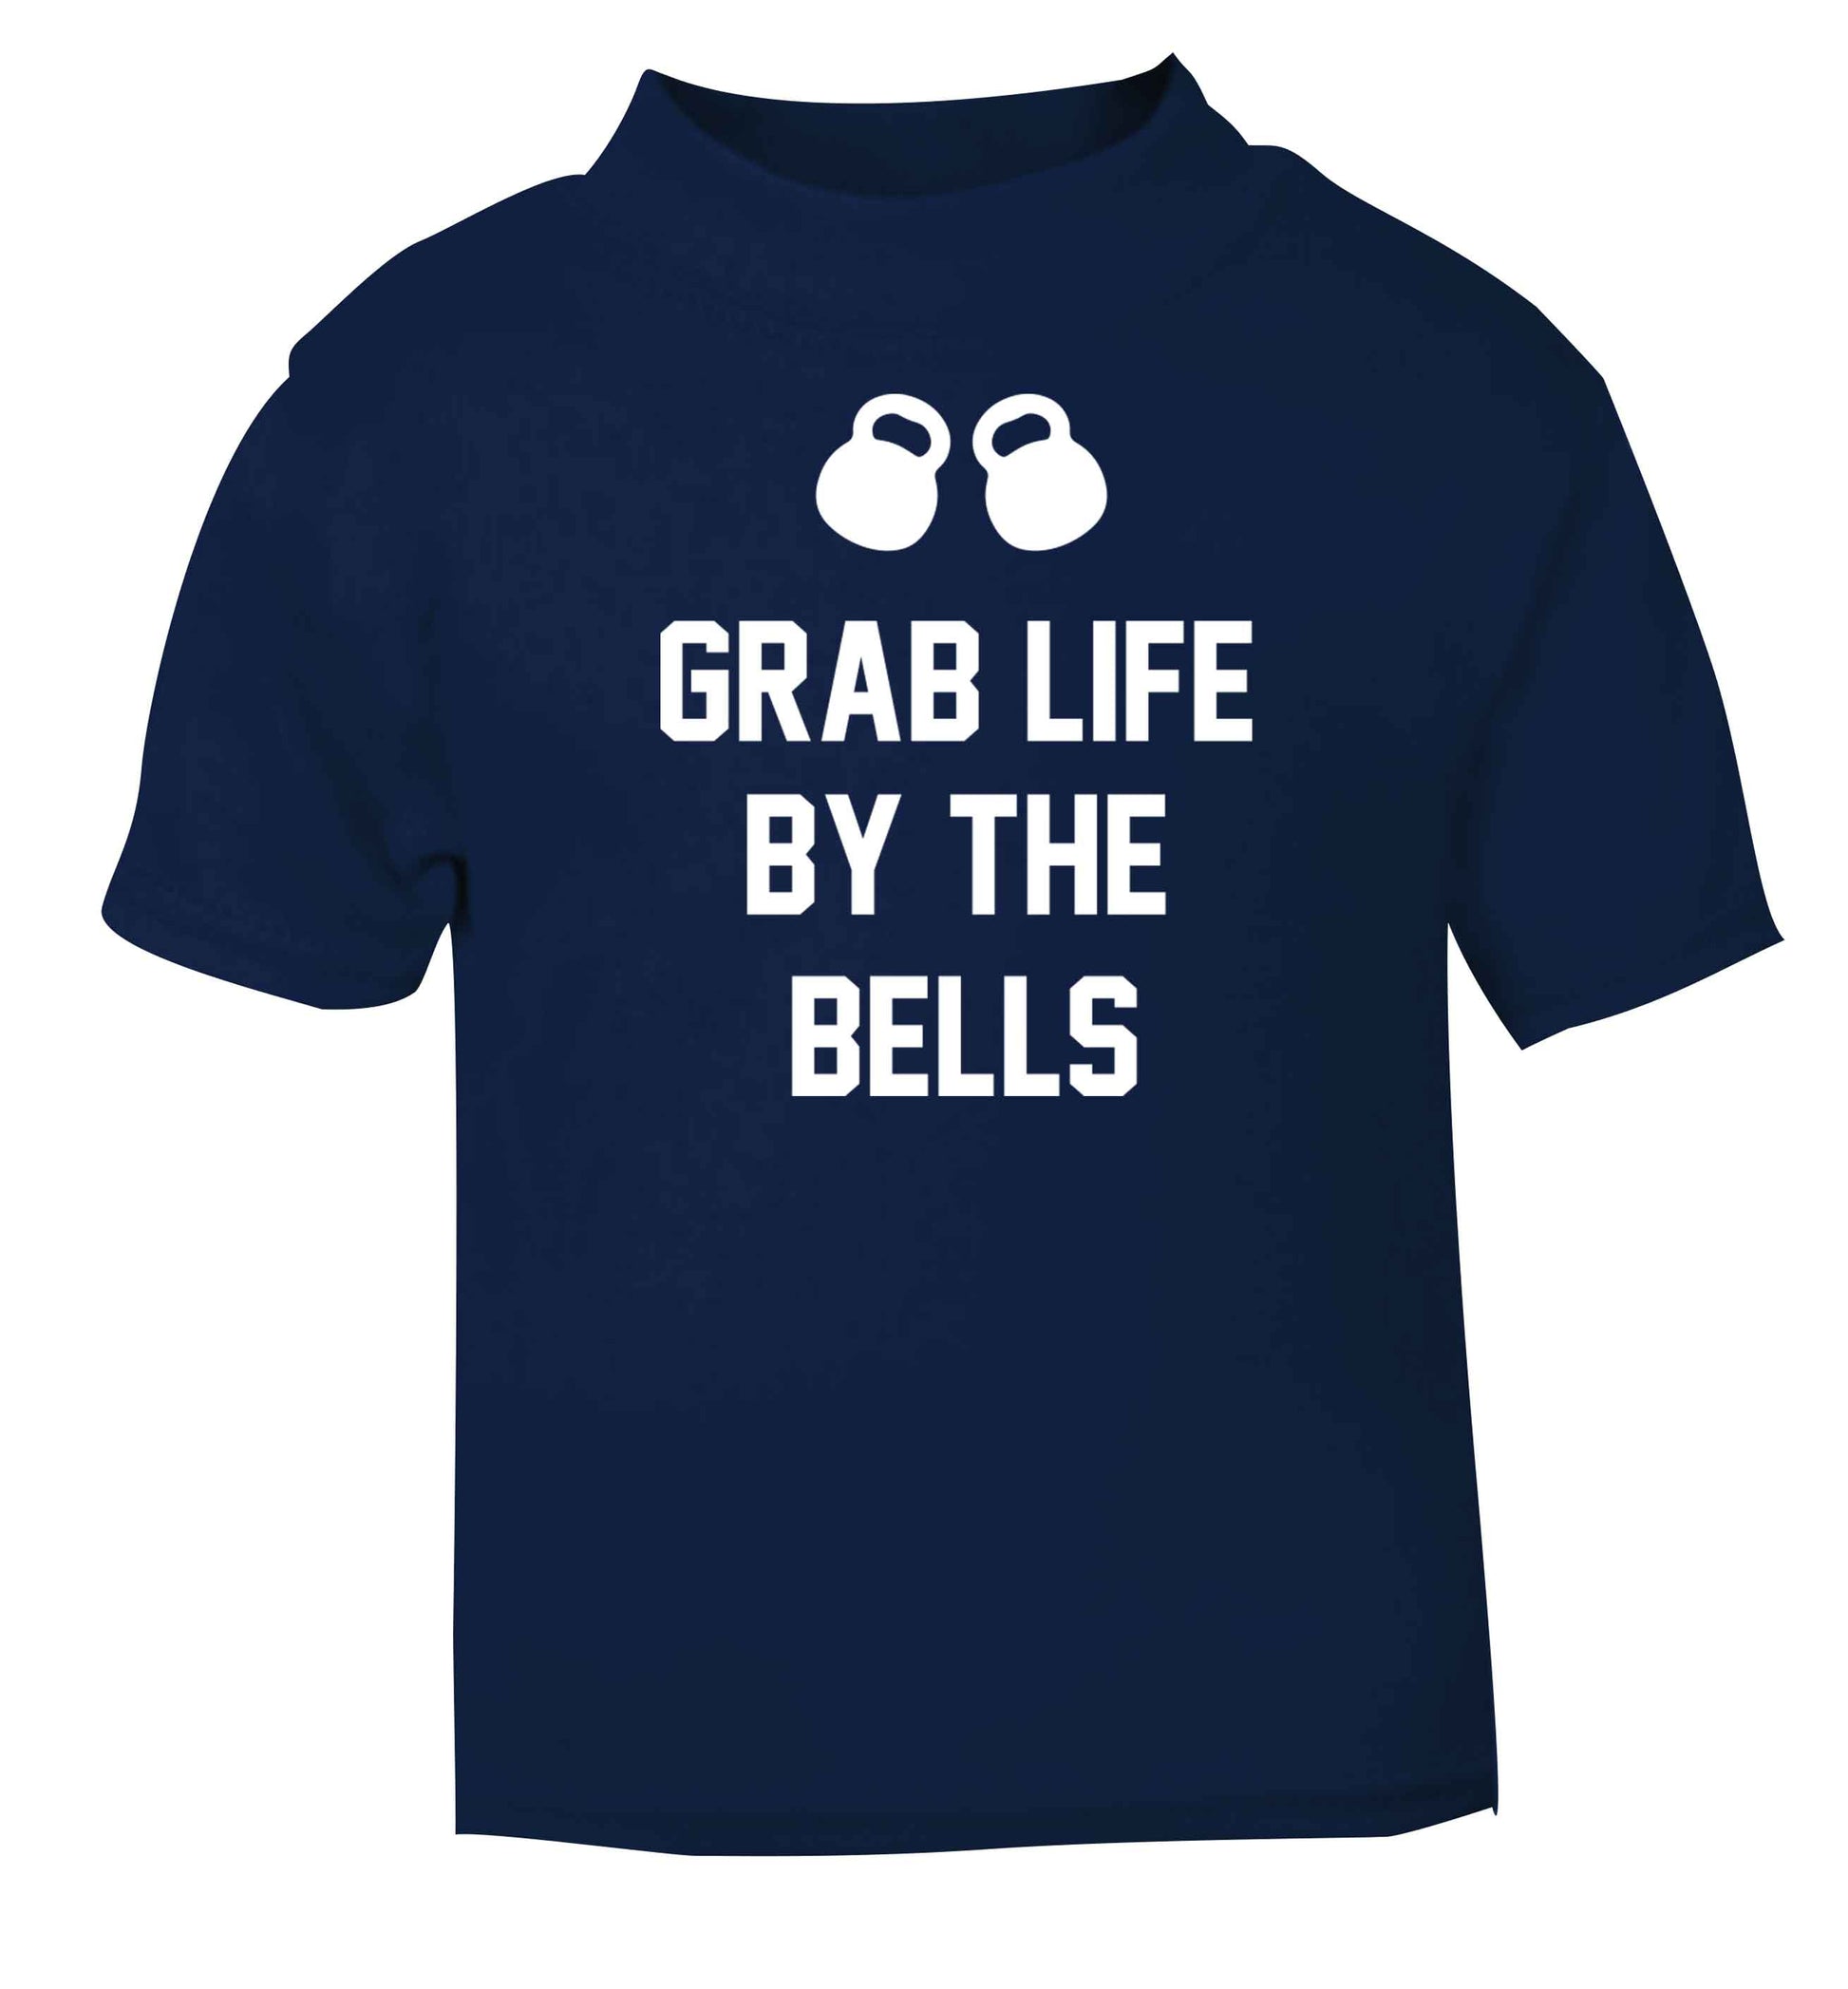 Grab life by the bells navy baby toddler Tshirt 2 Years